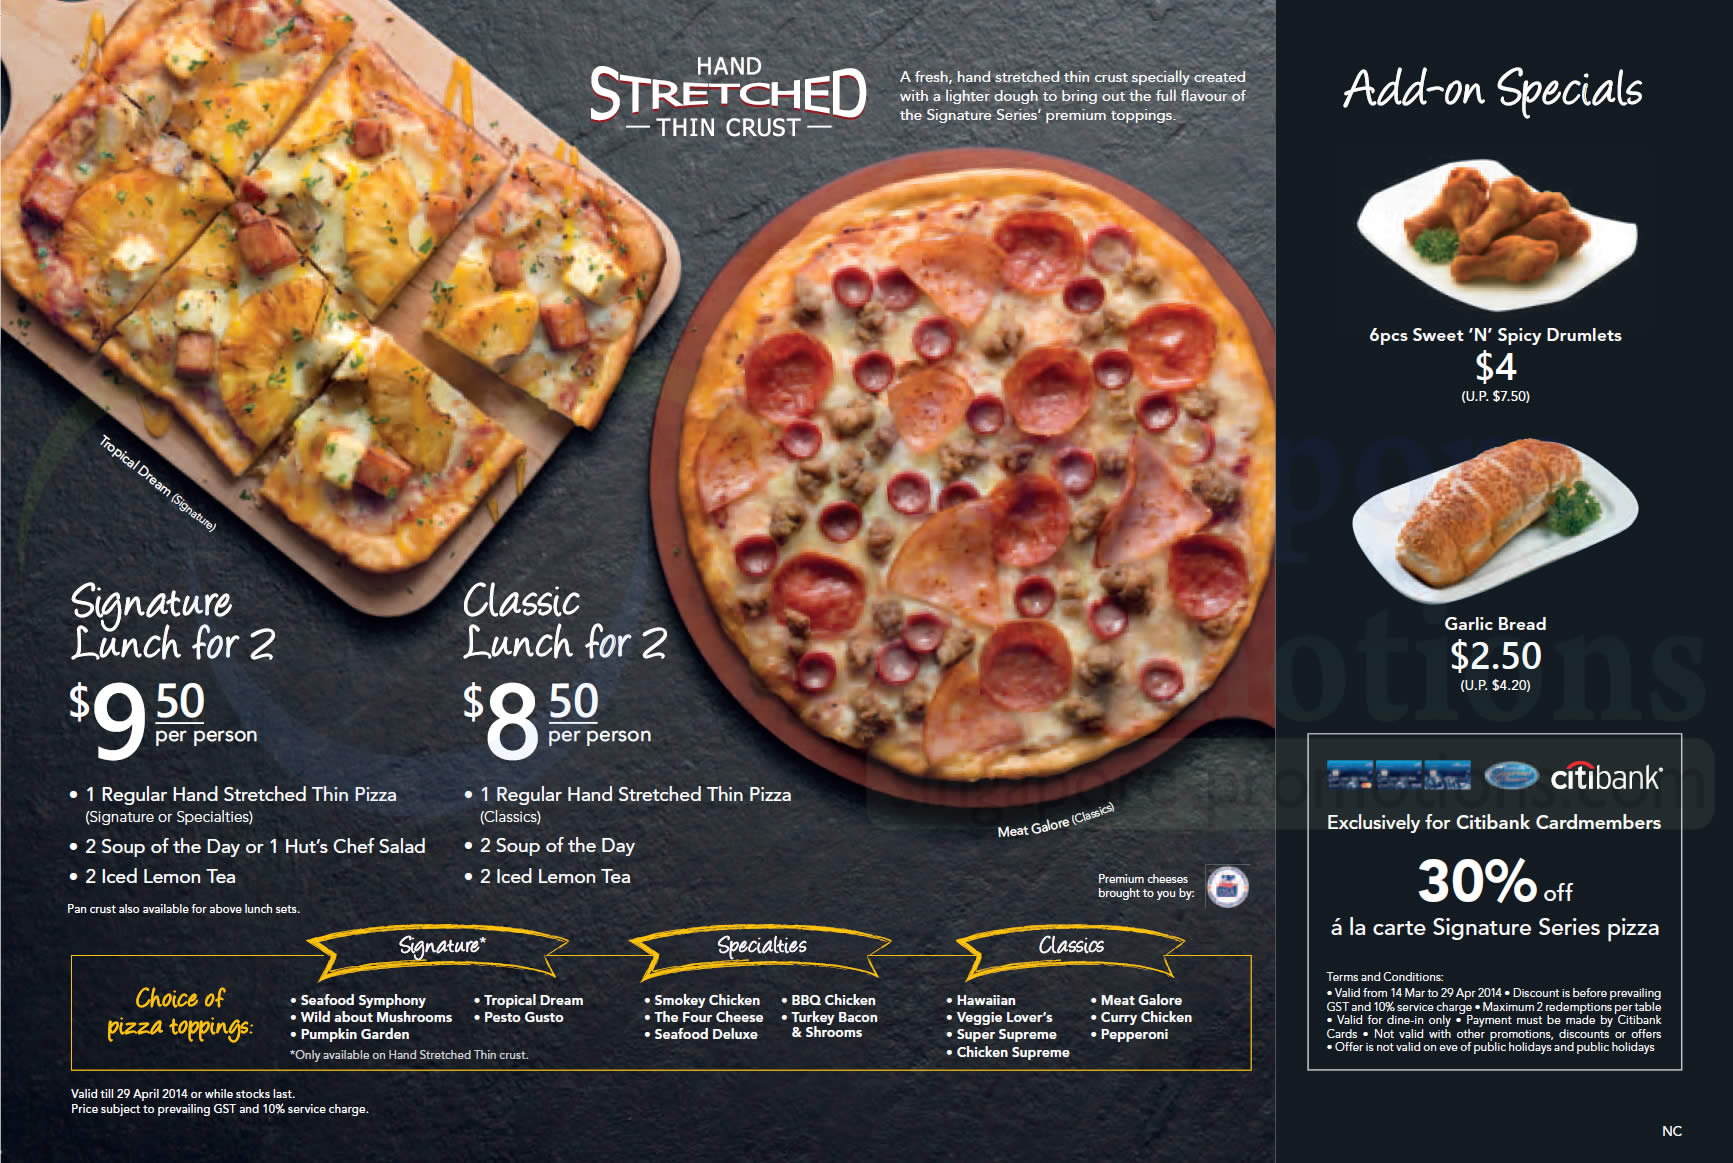 DineIn, Hand Strectched Thin Crust, Signature, Classic Lunch, Addons